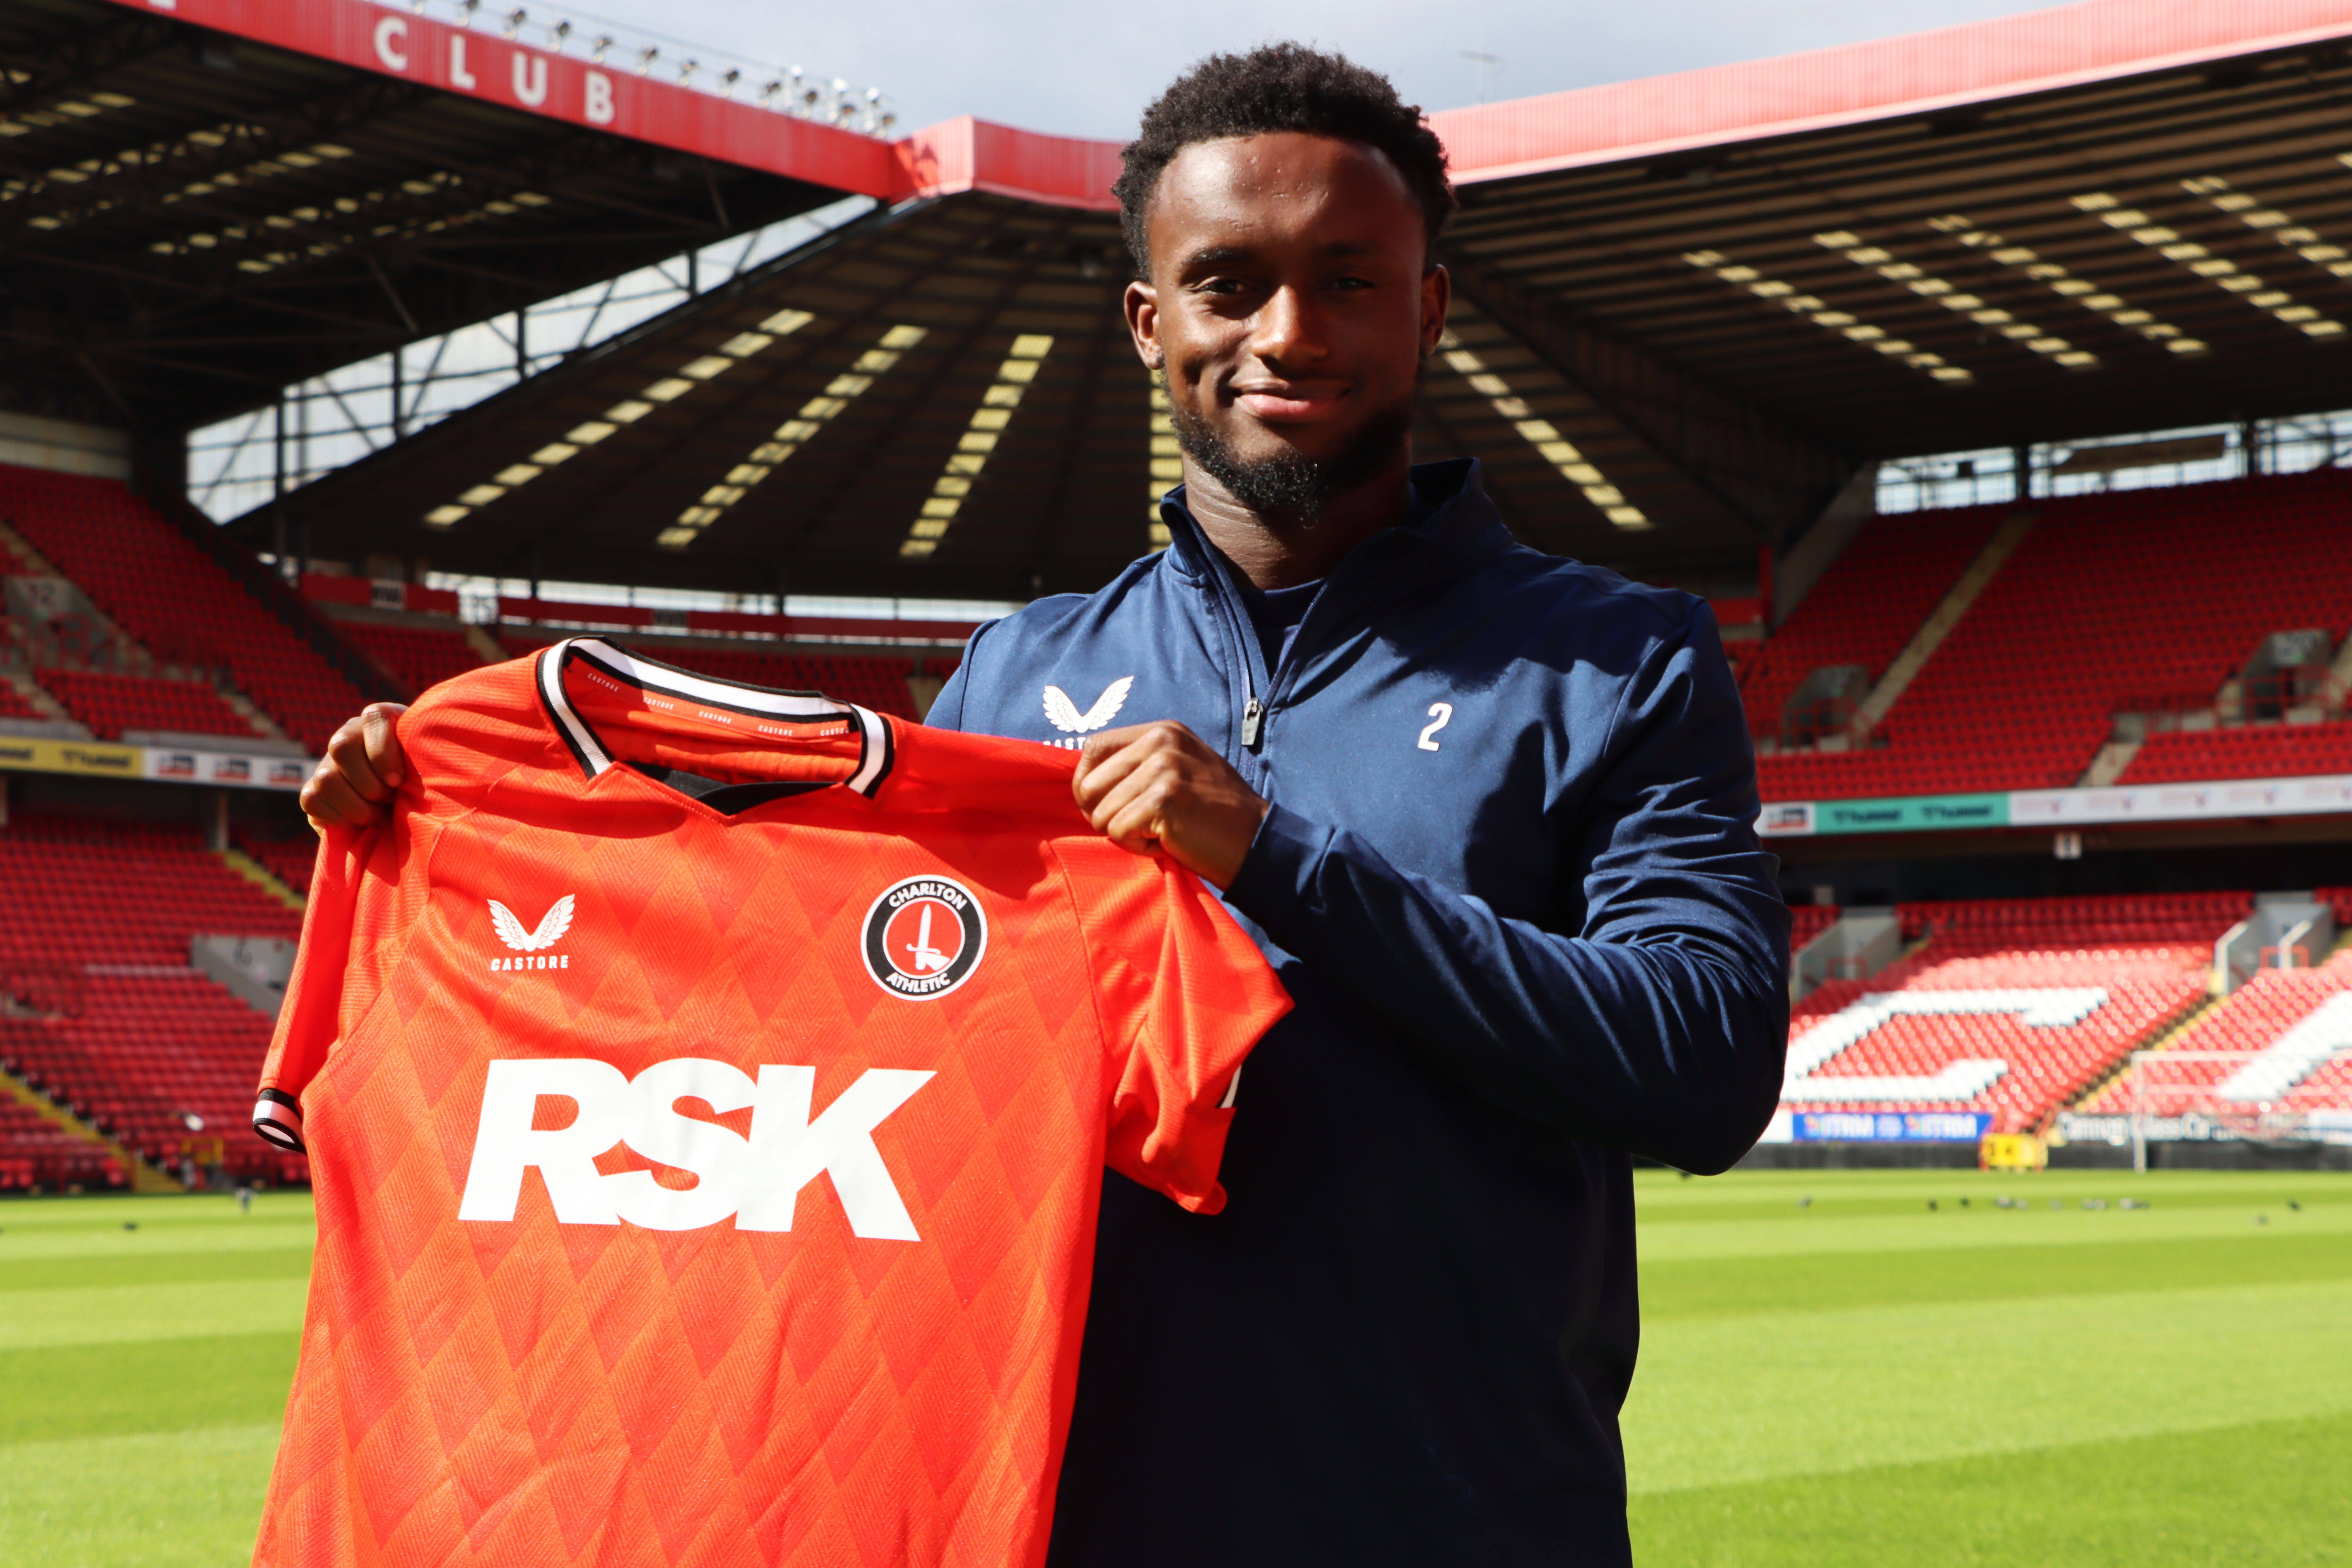 Steven Sessegnon holds up Charlton's new 2022/23 home shirt while on the pitch at The Valley